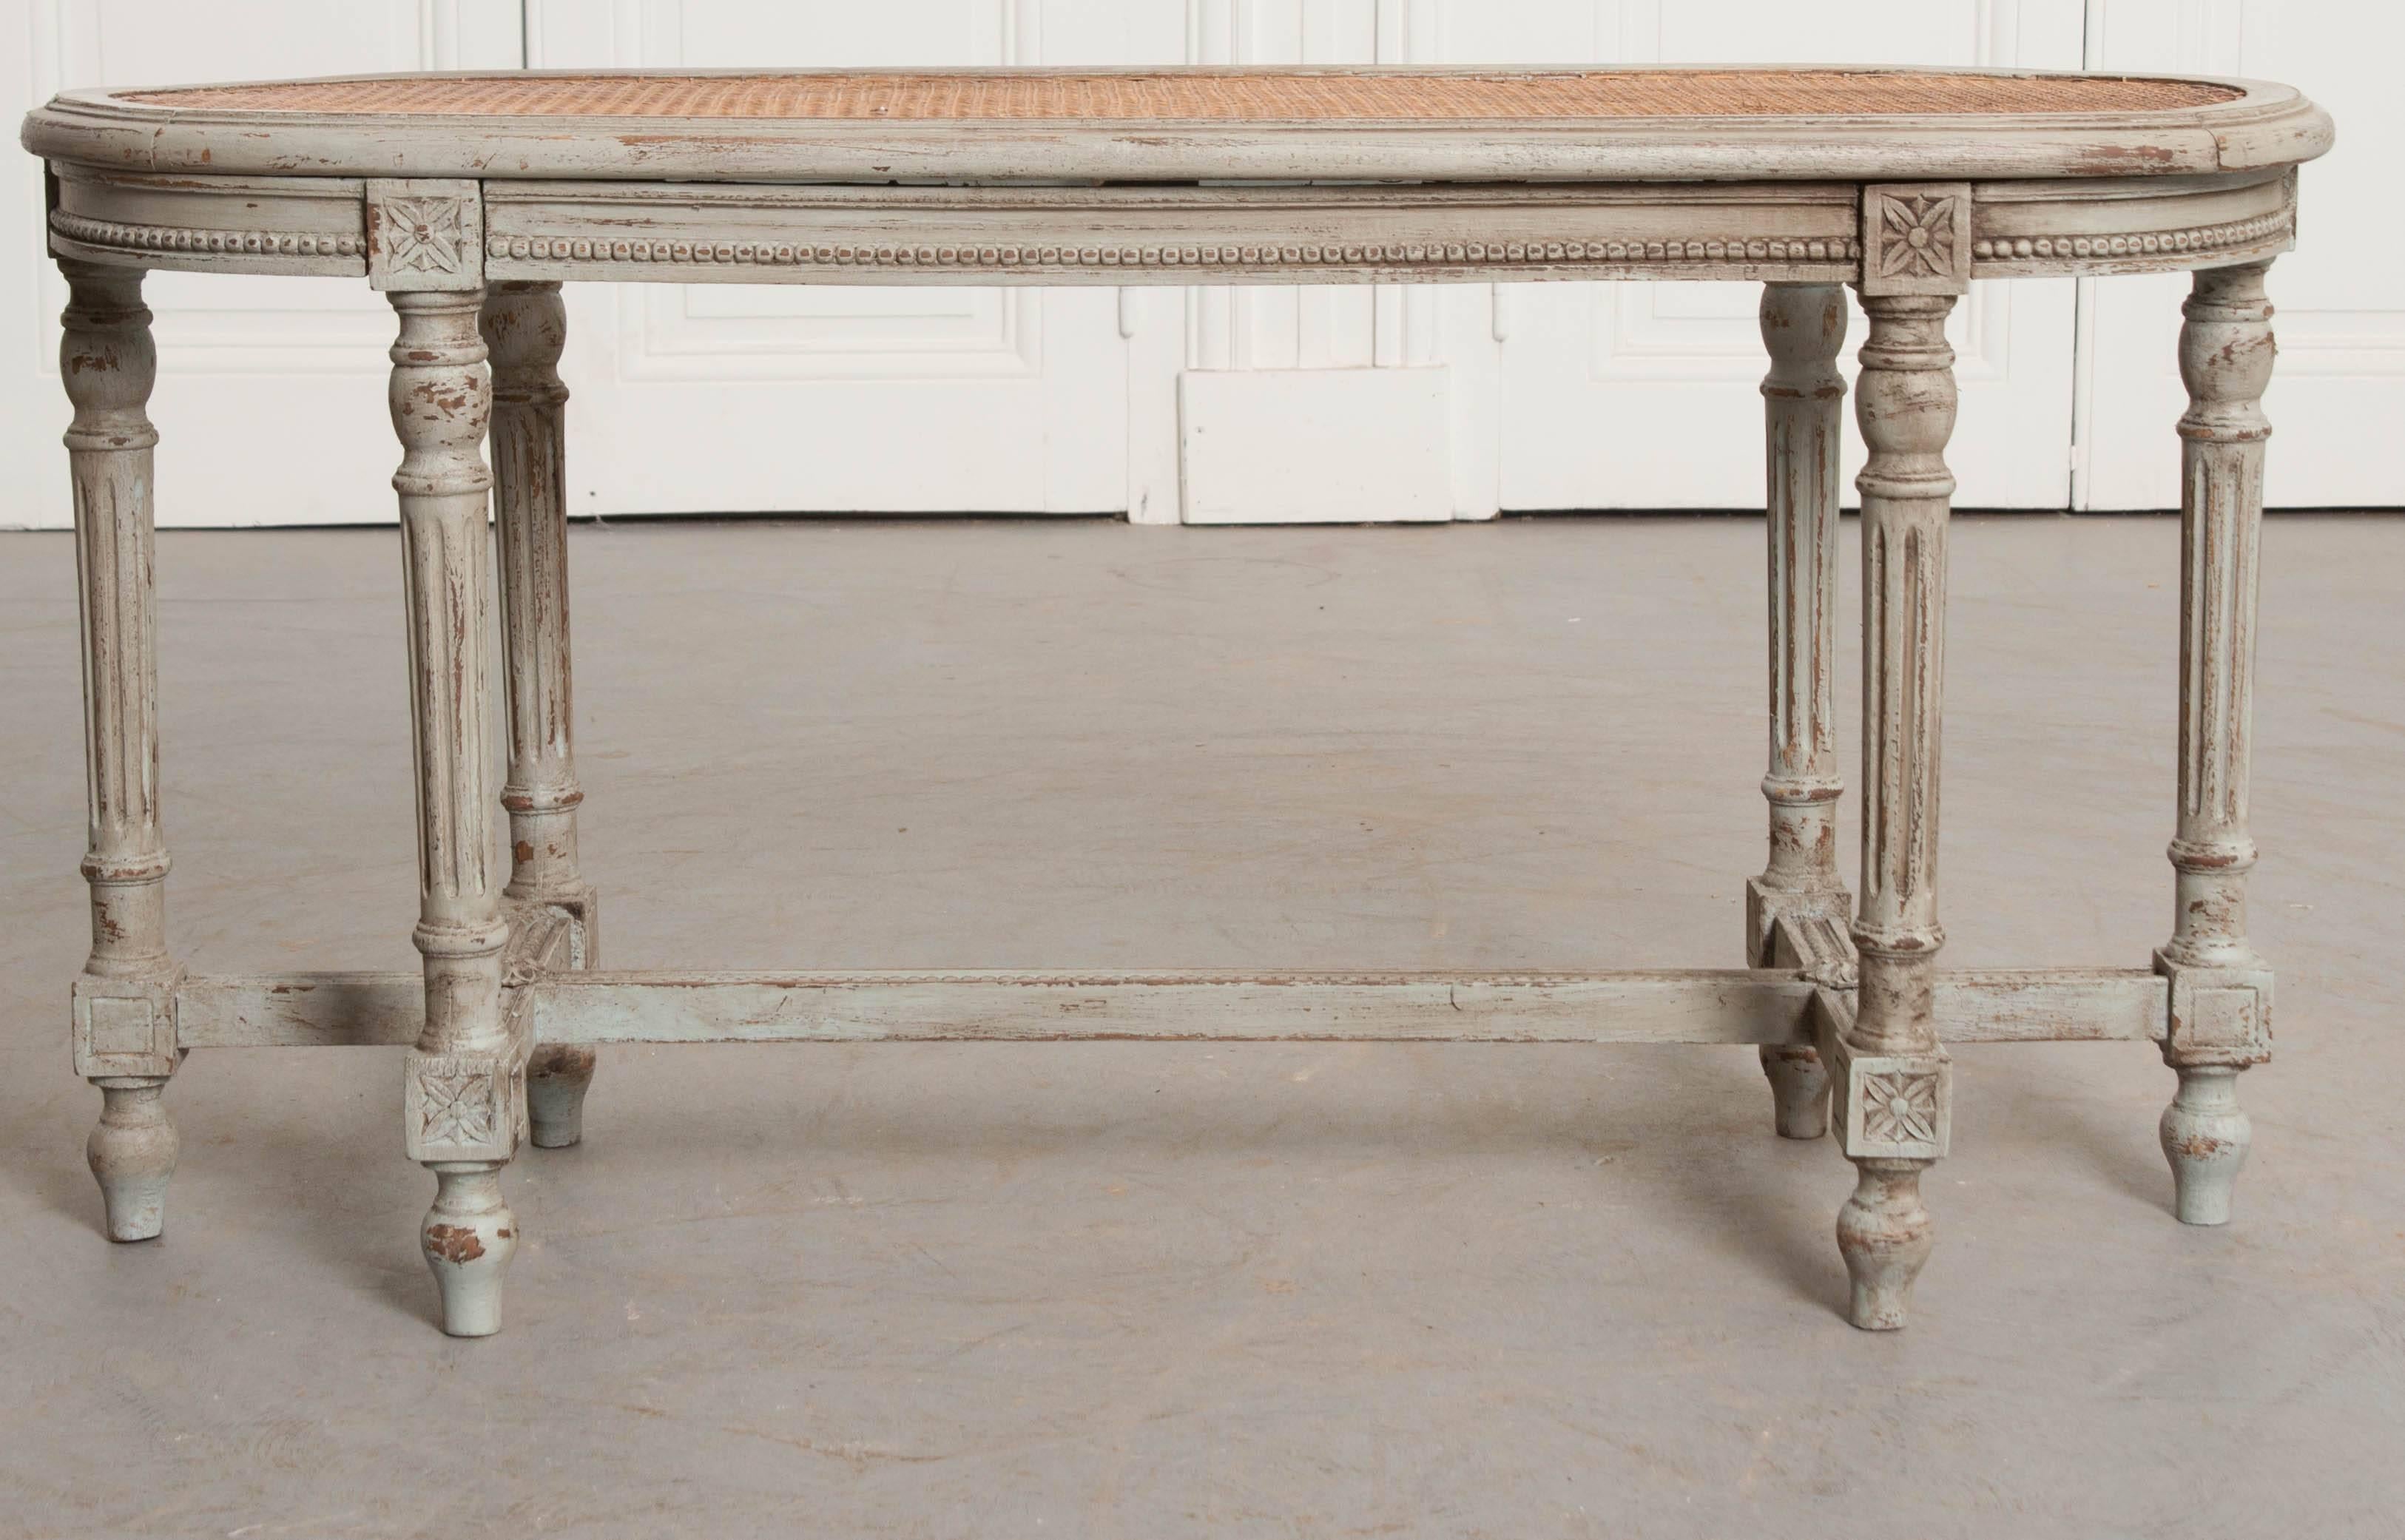 A lovely caned bench, done in the Louis XVI style, from 19th century France. This wonderful antique bench has been recently painted a French gray color that has undergone a process to give the new finish the appearance of age. The woven cane seat is